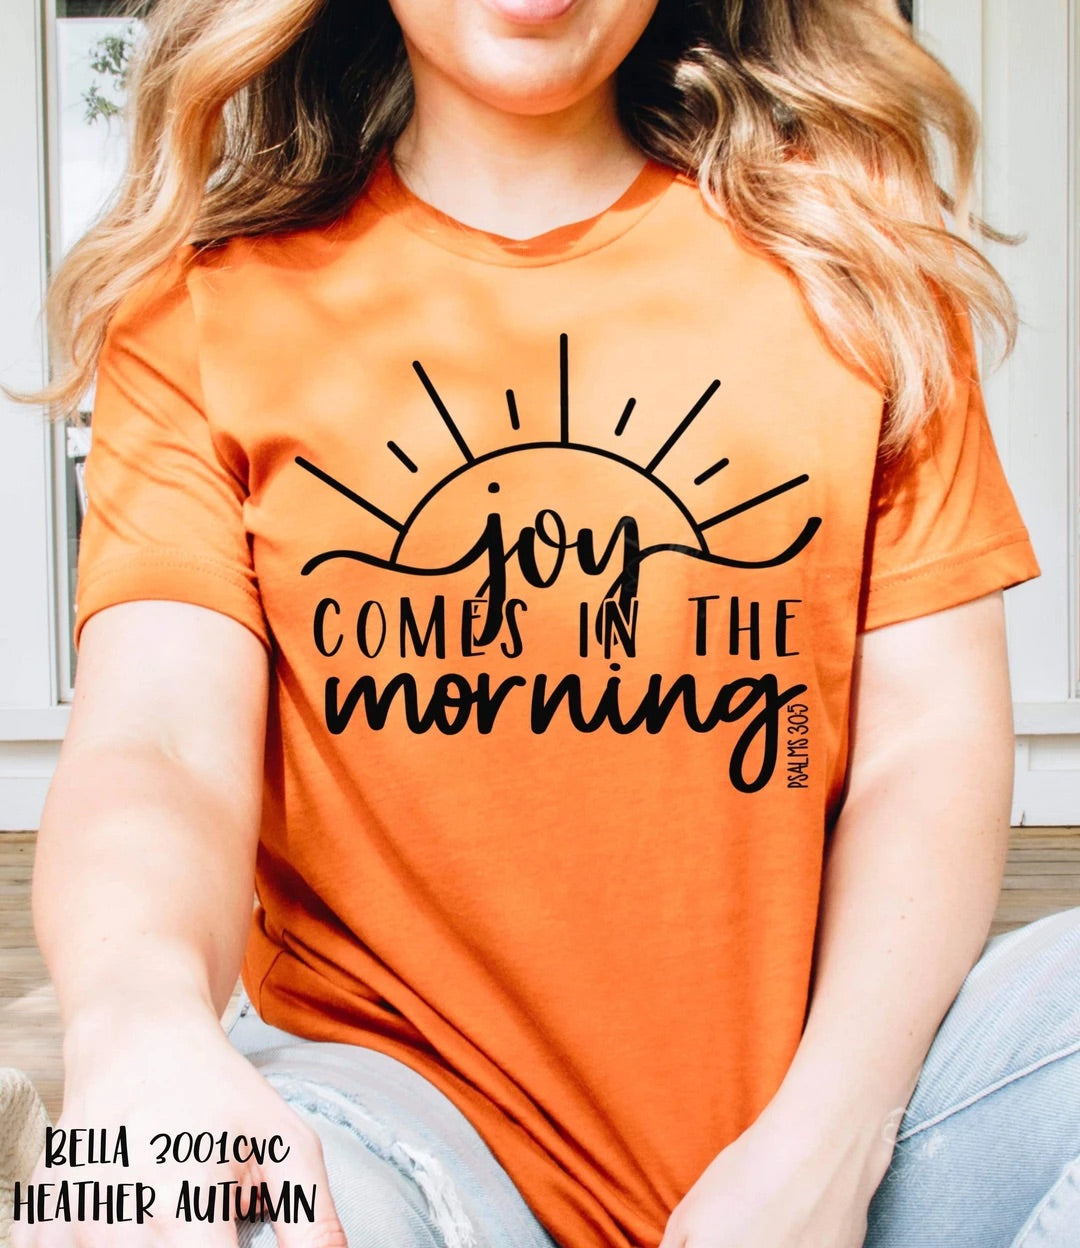 Joy comes in the morning T-shirt